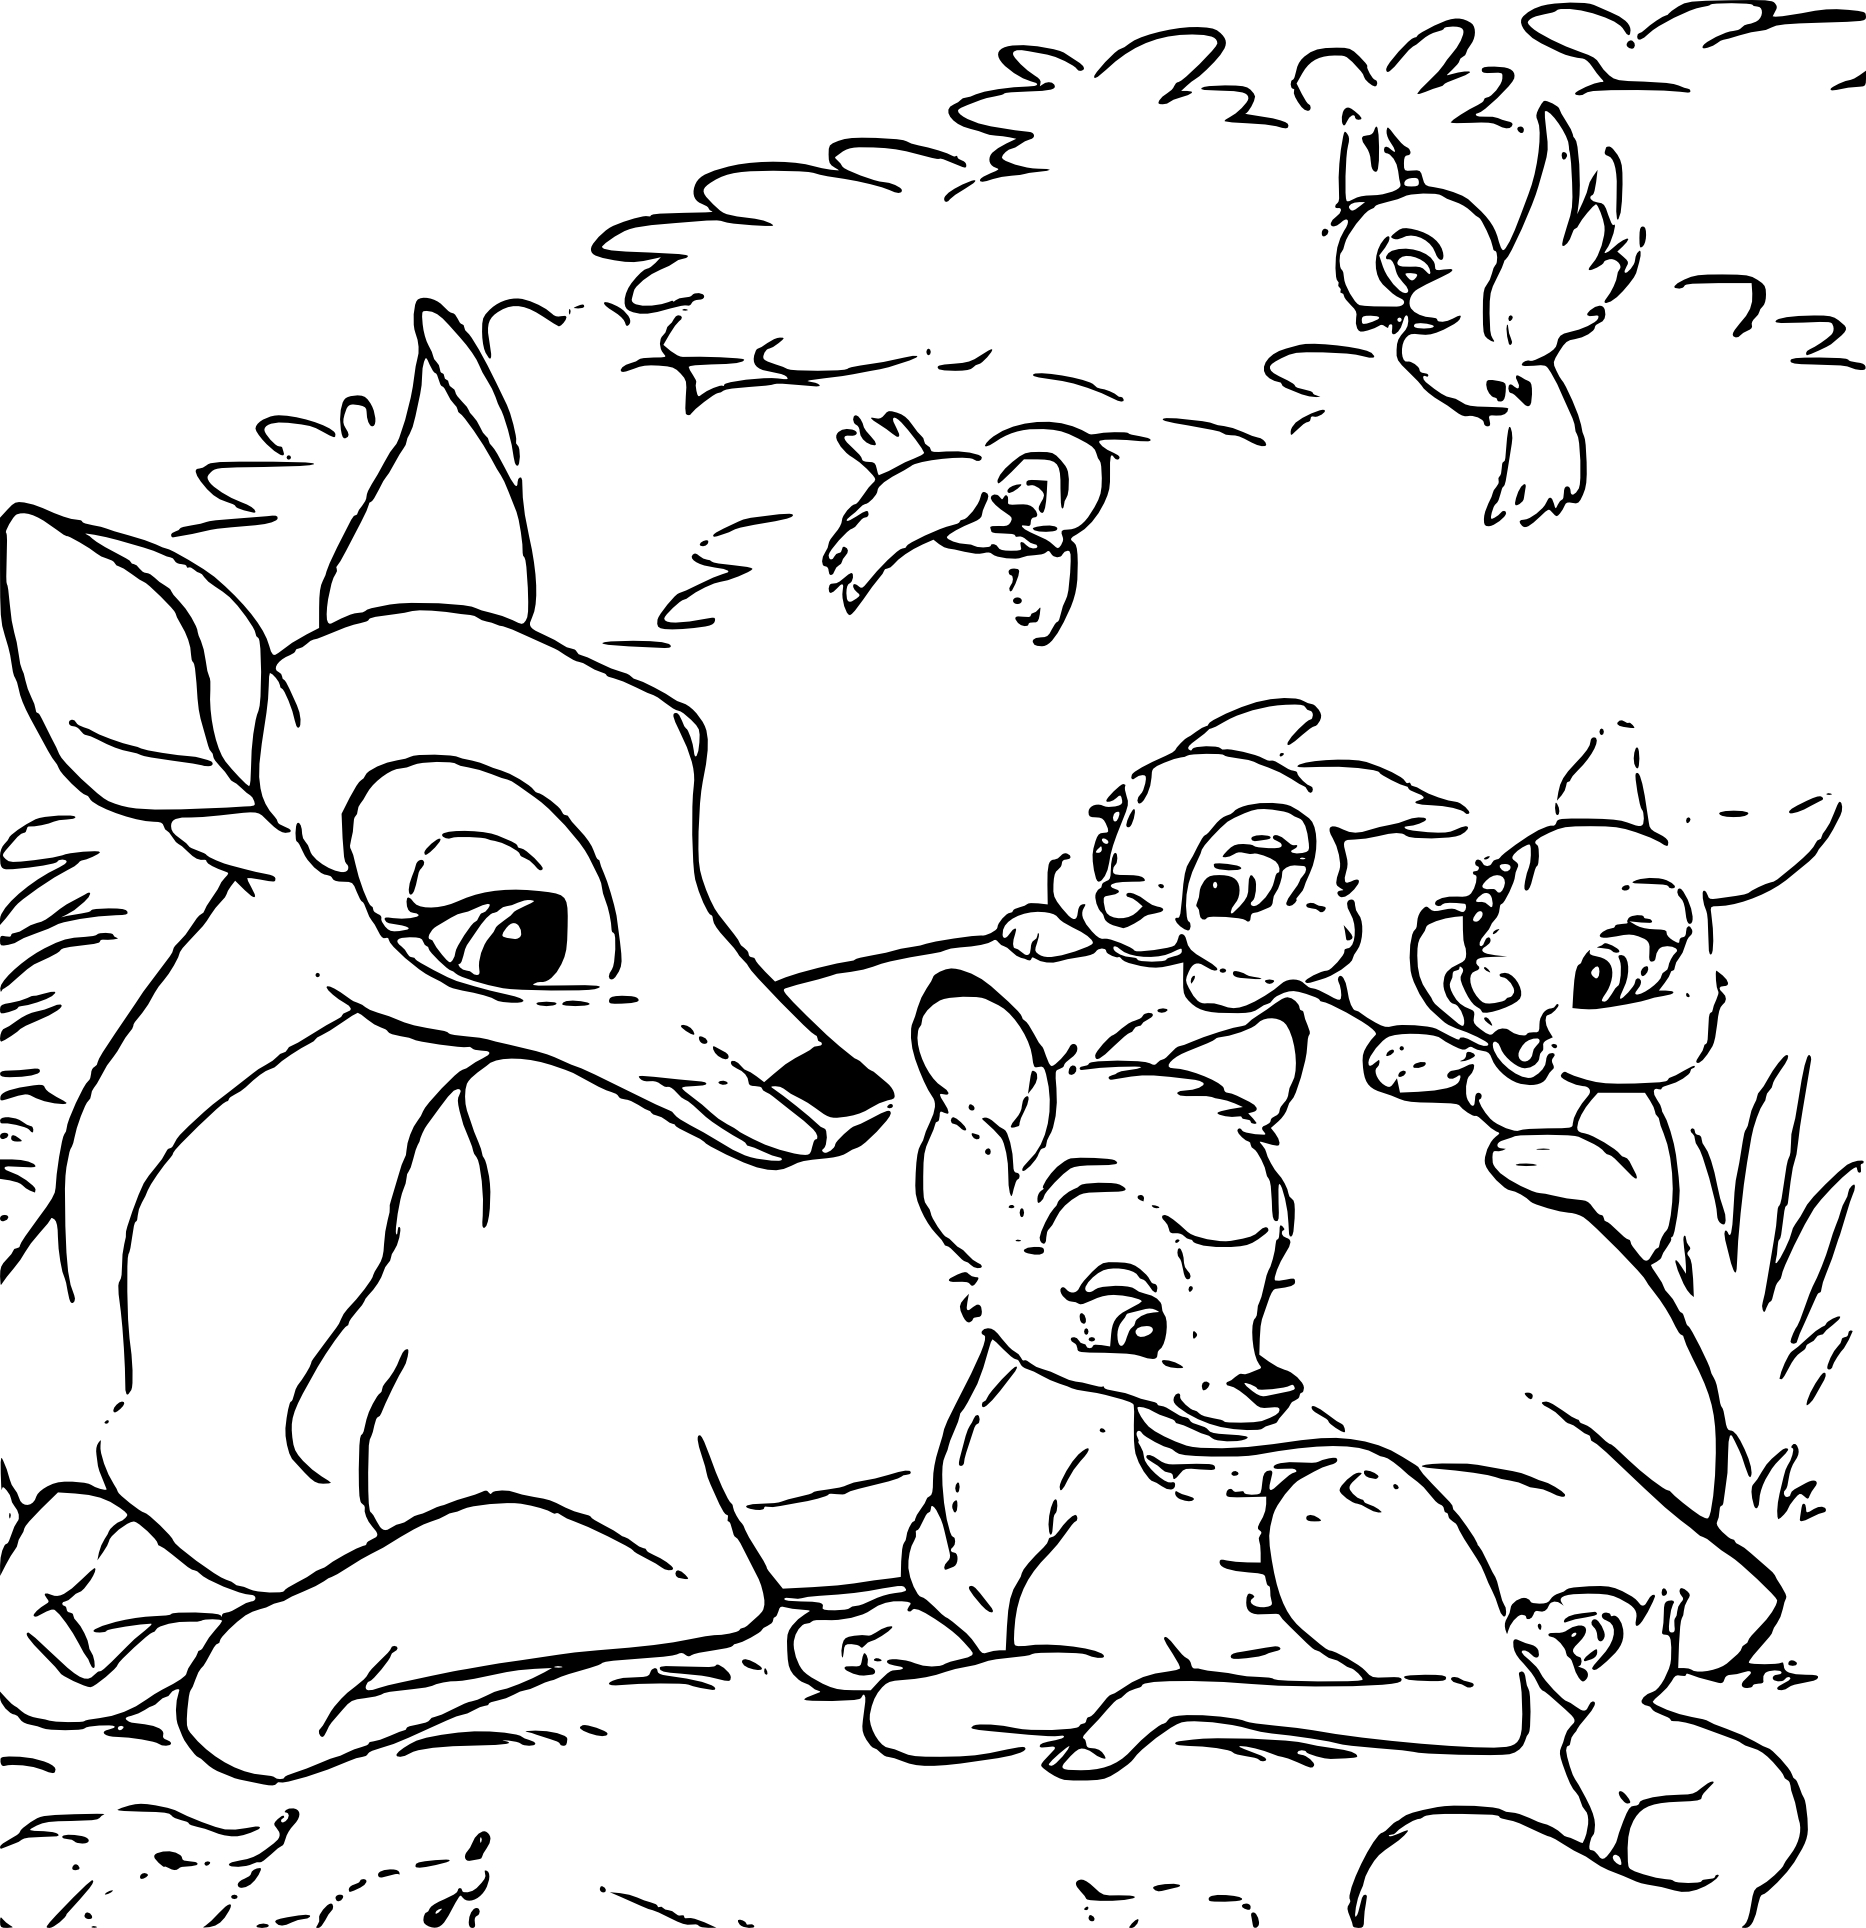 Bambi And His Mother coloring page